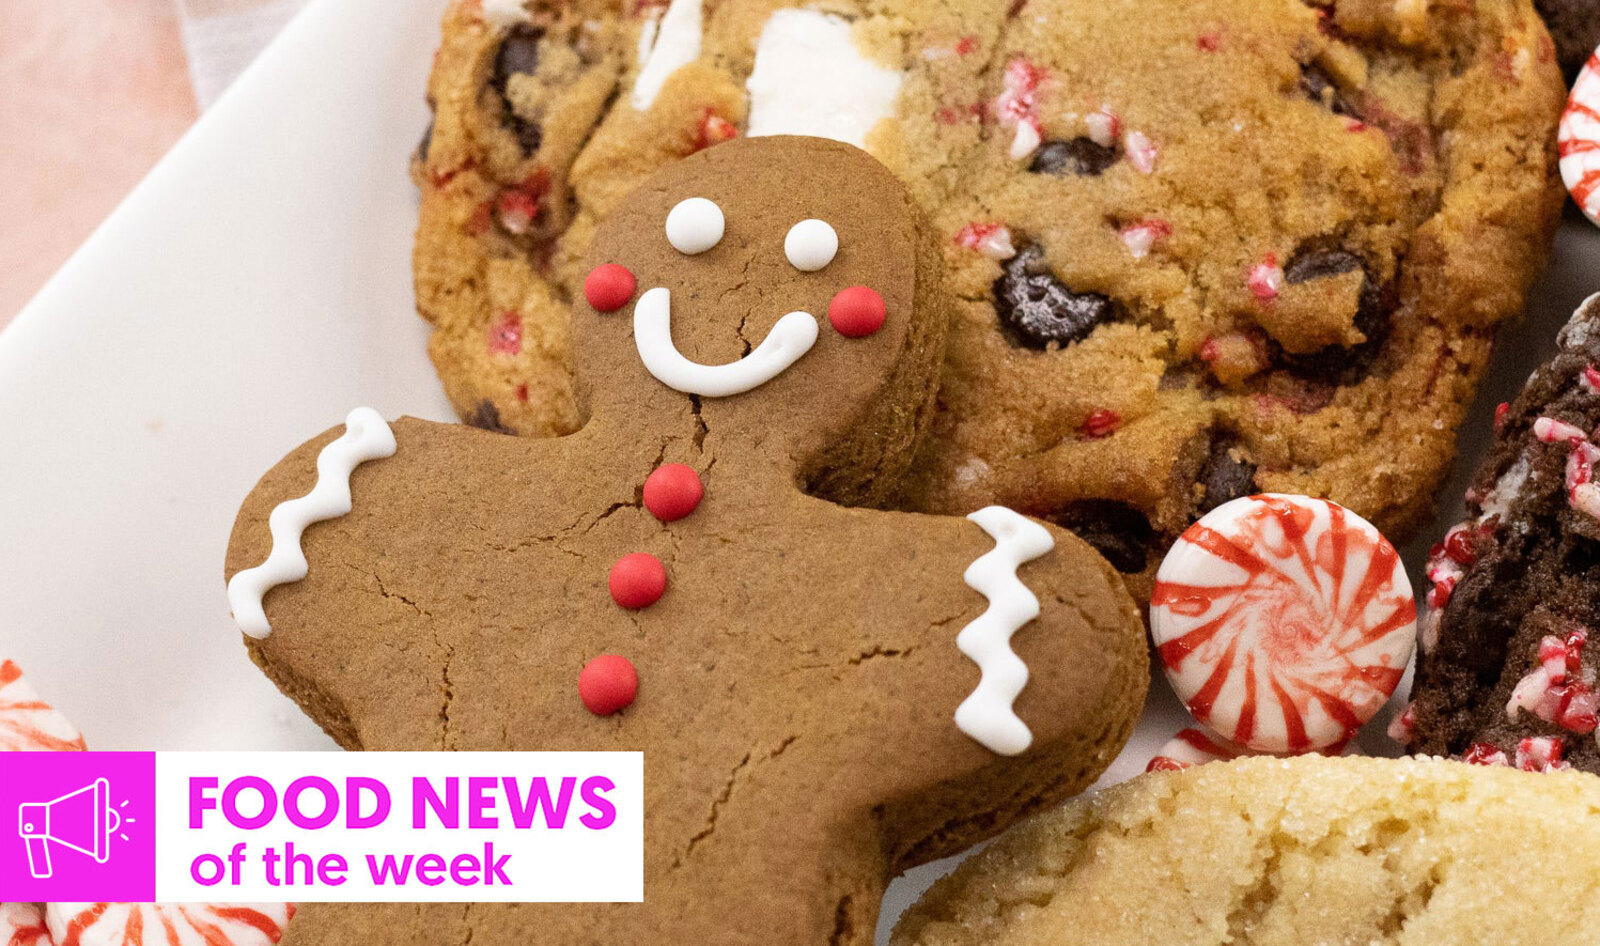 Vegan Food News of the Week: Holiday Cookie Kits, Pistachio “Nutella,” and More